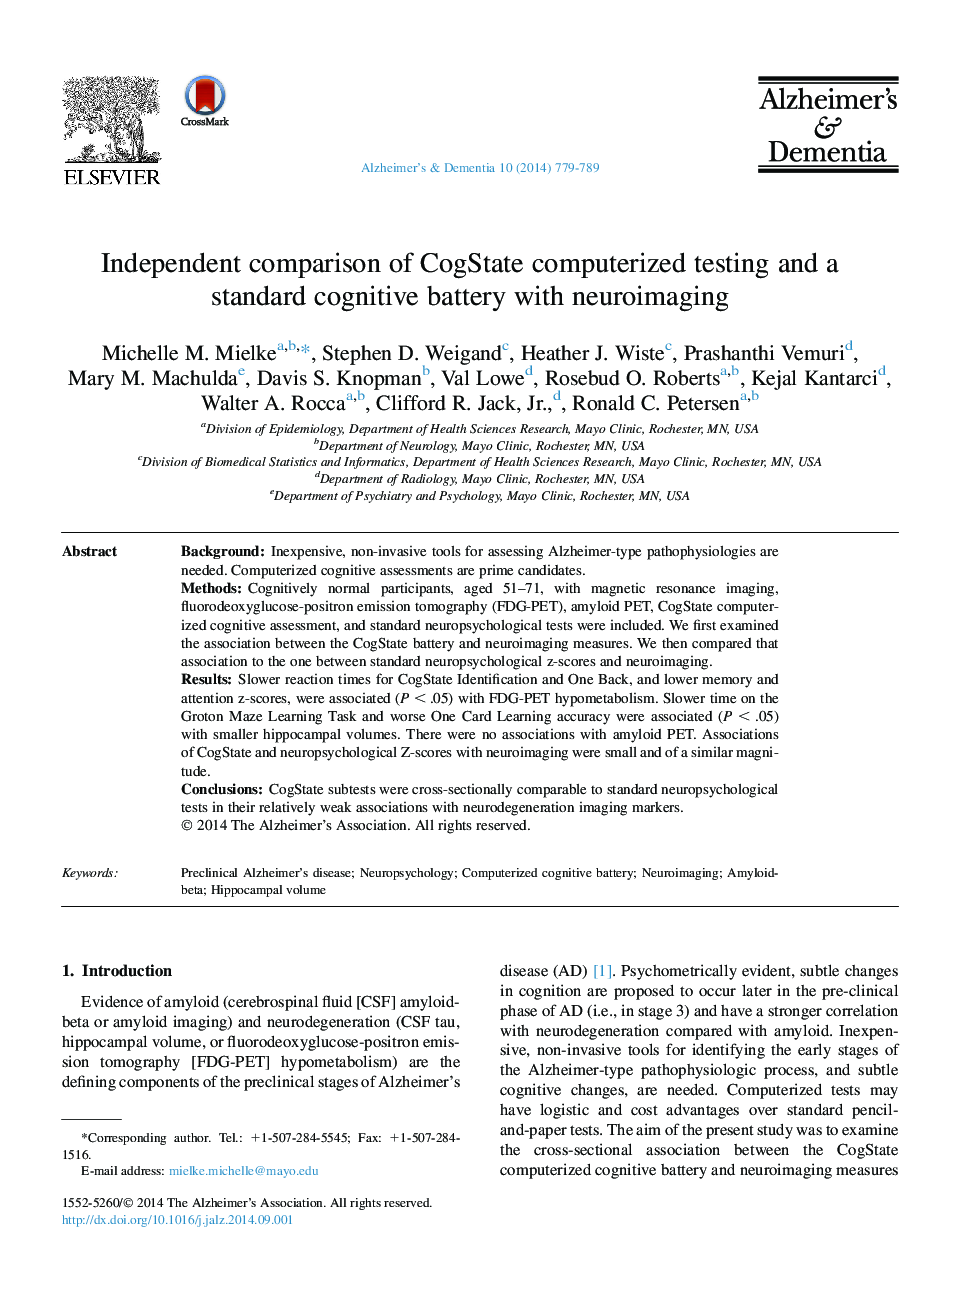 Featured ArticleIndependent comparison of CogState computerized testing and a standard cognitive battery with neuroimaging